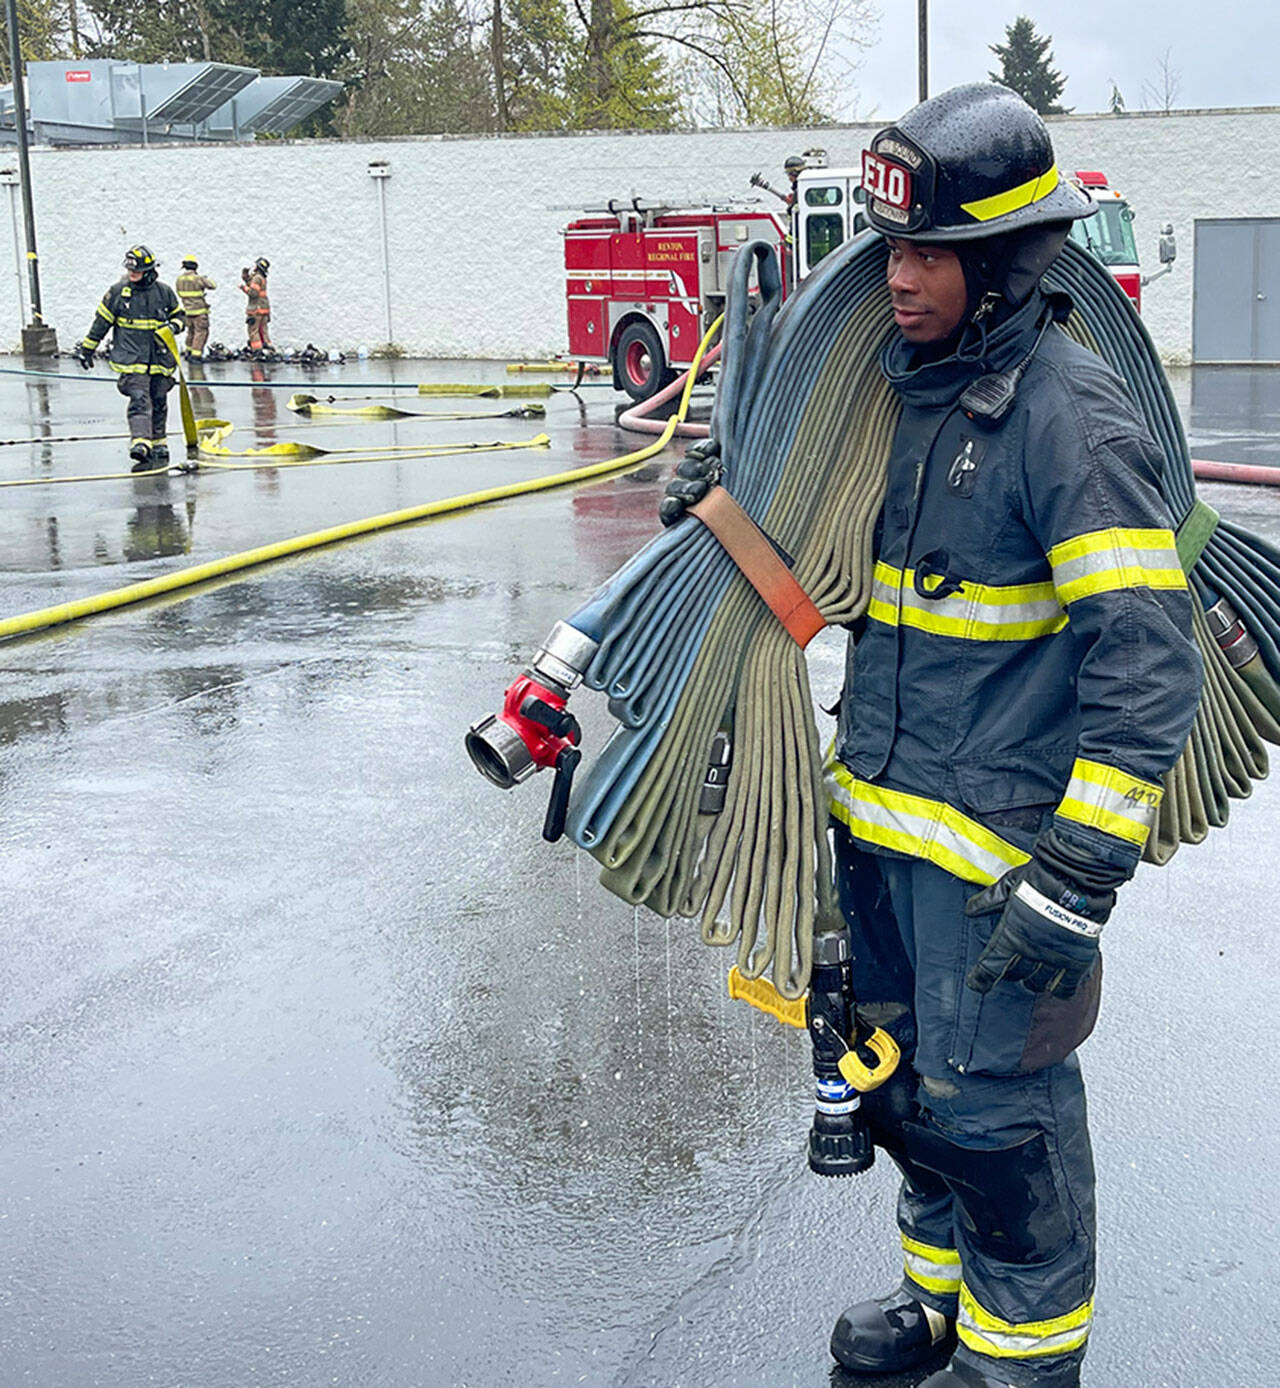 Puget Sound Fire recruit firefighter Gabriel Coleman at a recent training session. COURTESY PHOTO, Puget Sound Fire